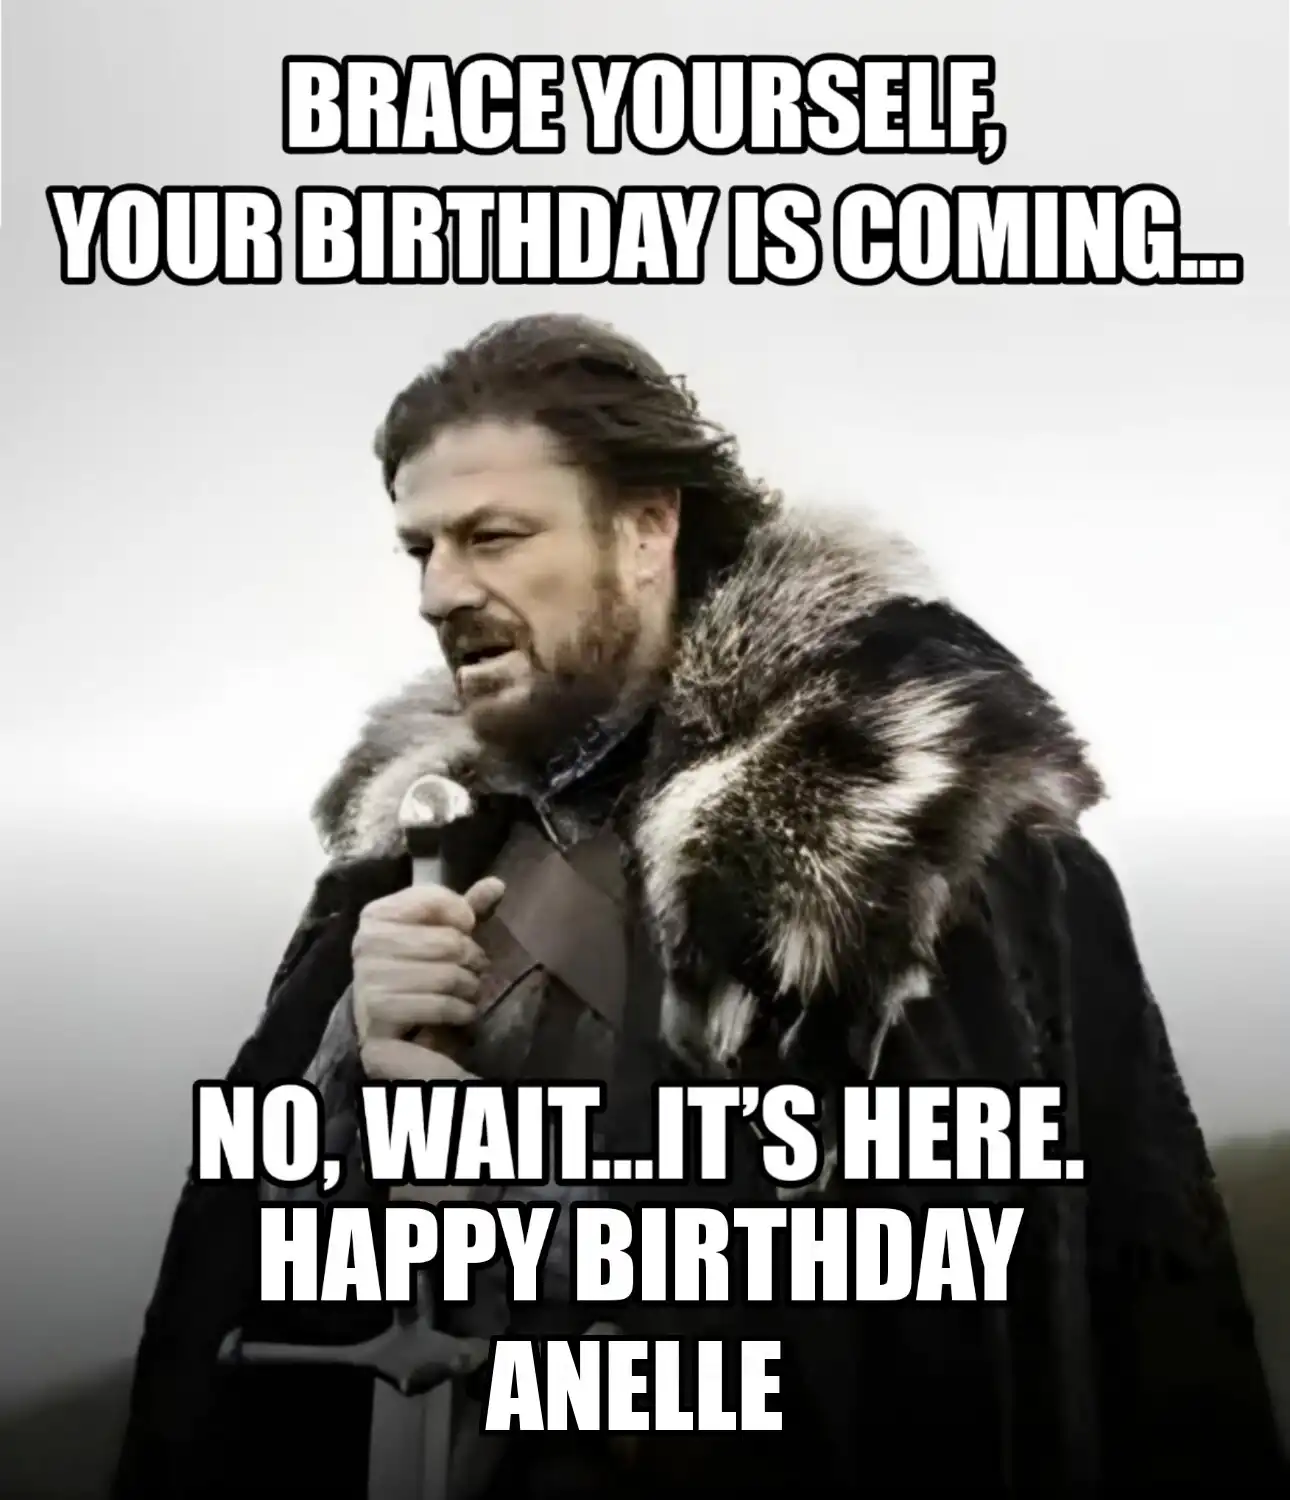 Happy Birthday Anelle Brace Yourself Your Birthday Is Coming Meme